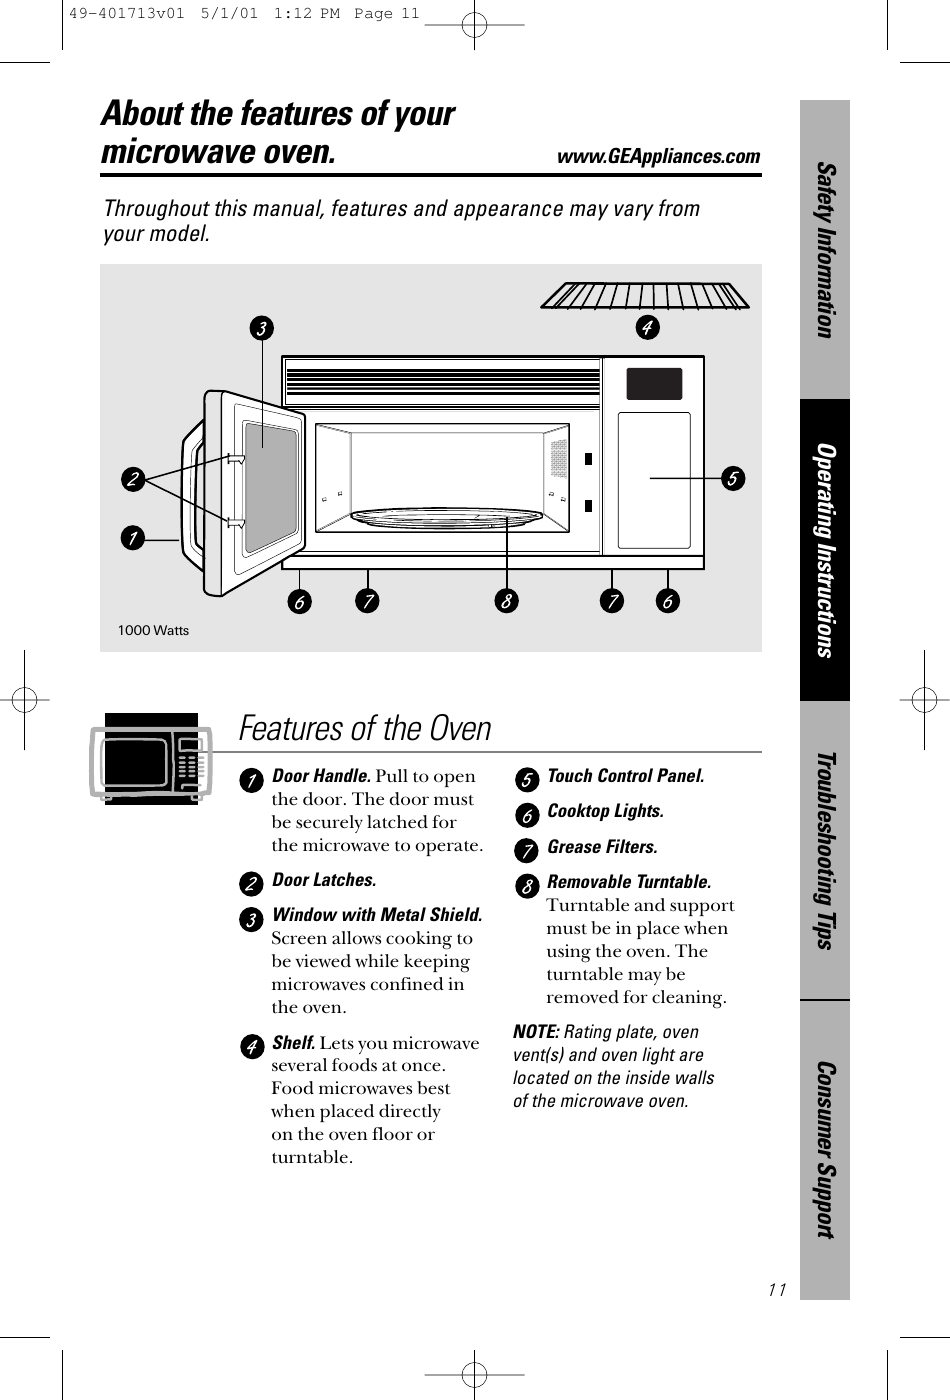 Consumer SupportTroubleshooting TipsOperating InstructionsSafety Information11About the features of your microwave oven.www.GEAppliances.comThroughout this manual, features and appearance may vary from your model.Features of the OvenDoor Handle. Pull to openthe door. The door mustbe securely latched forthe microwave to operate.Door Latches. Window with Metal Shield.Screen allows cooking tobe viewed while keepingmicrowaves confined inthe oven.Shelf. Lets you microwaveseveral foods at once.Food microwaves bestwhen placed directly on the oven floor orturntable.Touch Control Panel. Cooktop Lights.Grease Filters.Removable Turntable.Turntable and supportmust be in place whenusing the oven. Theturntable may beremoved for cleaning.NOTE: Rating plate, oven vent(s) and oven light arelocated on the inside walls of the microwave oven.1000 Watts49-401713v01  5/1/01  1:12 PM  Page 11